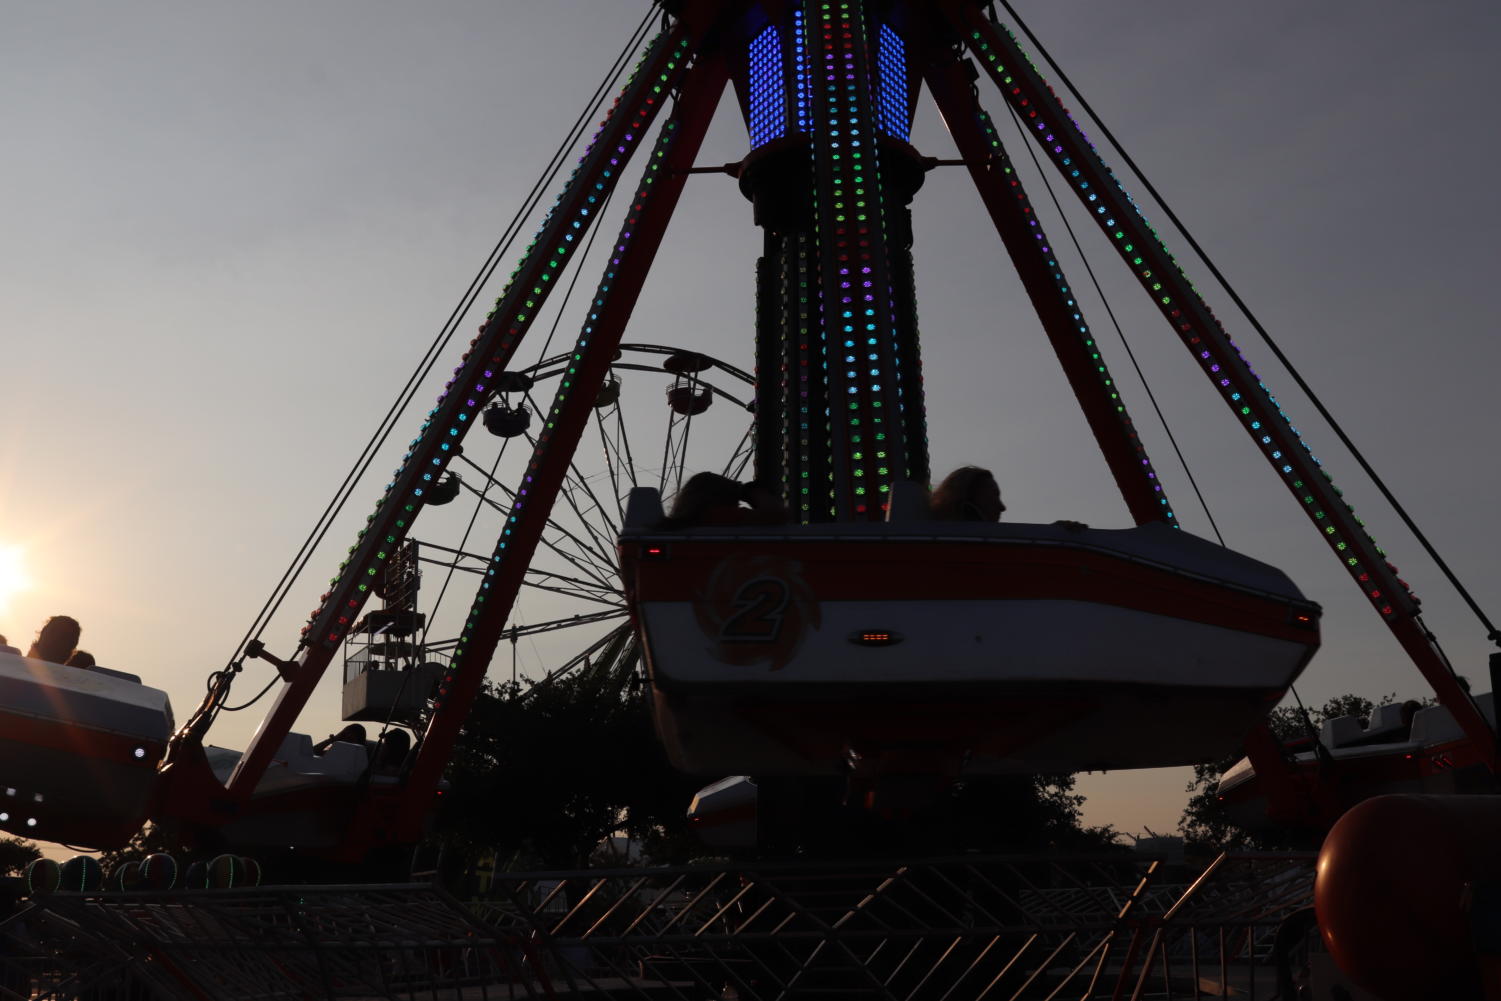 Carnival reinforces Coppell family traditions, unites community